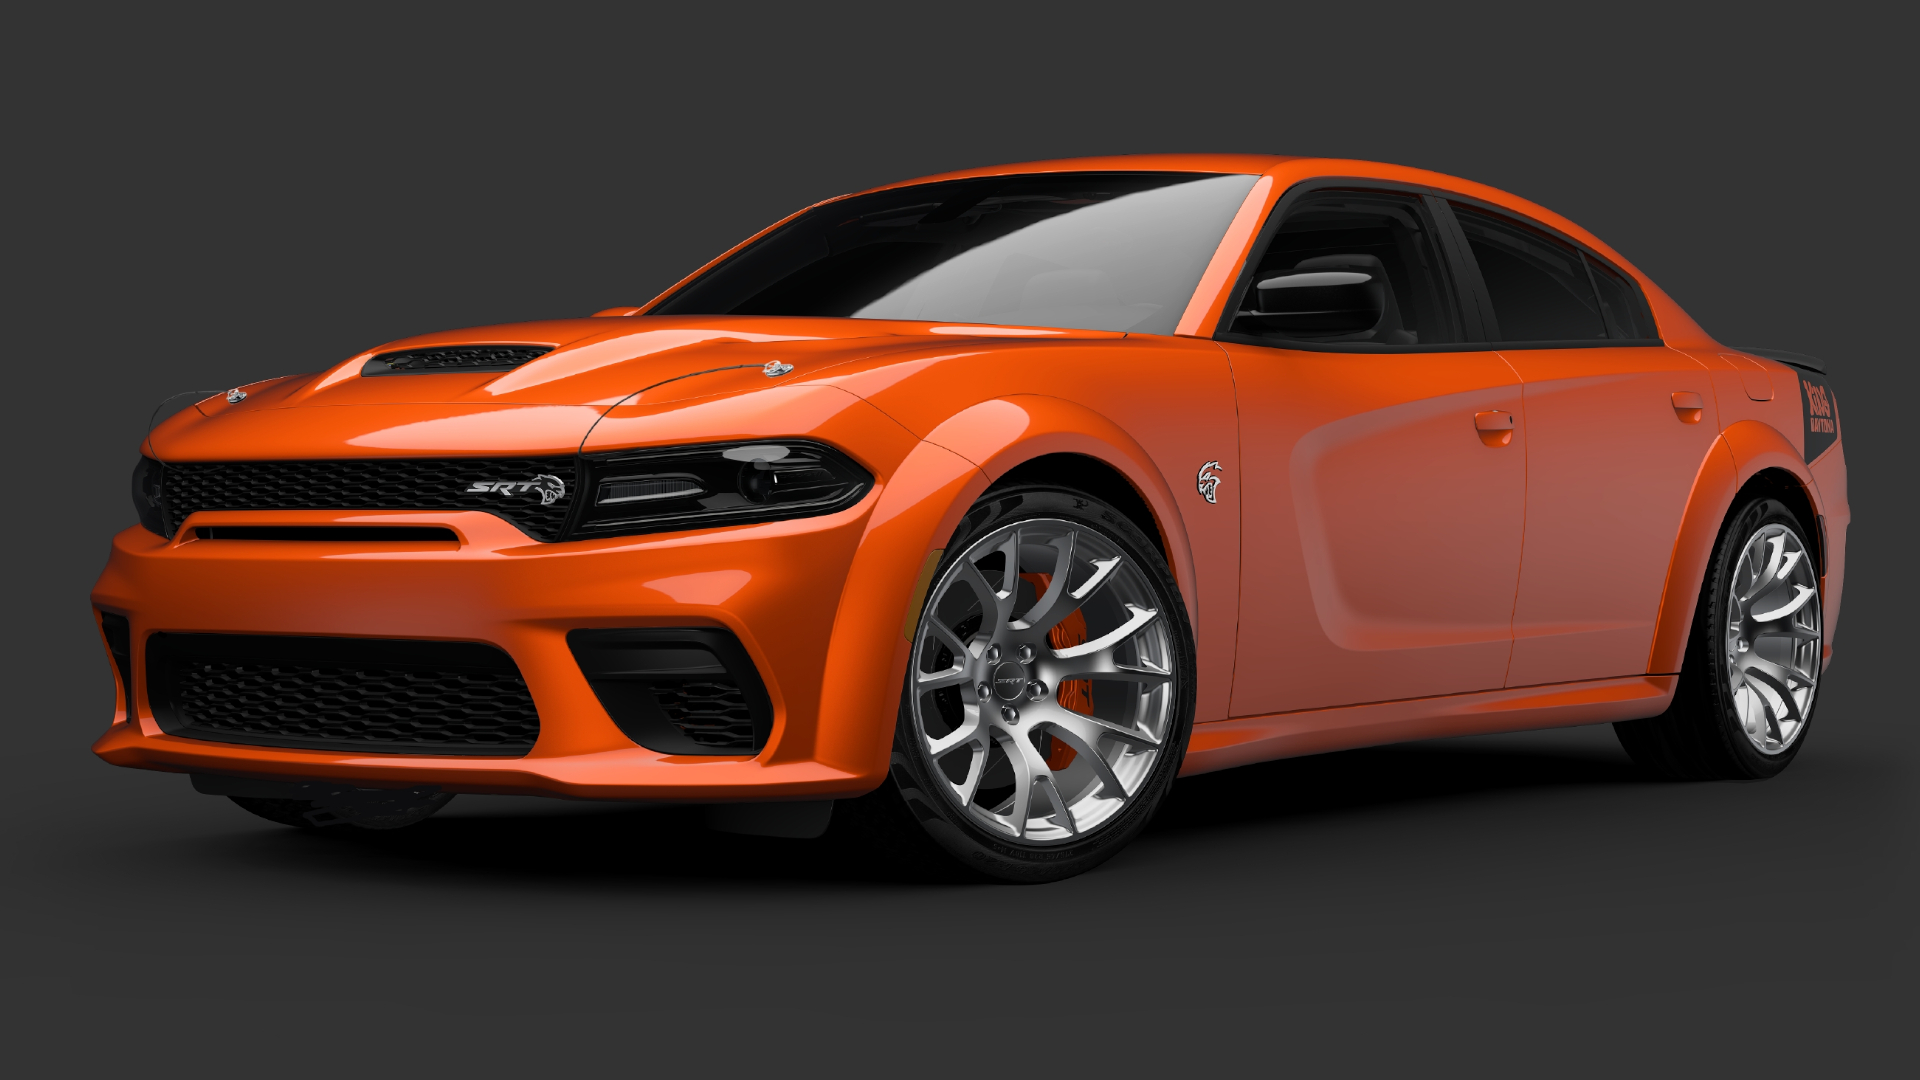 2023 Dodge Charger King Daytona Orange Paint, a Sticker Pack, and 807 HP